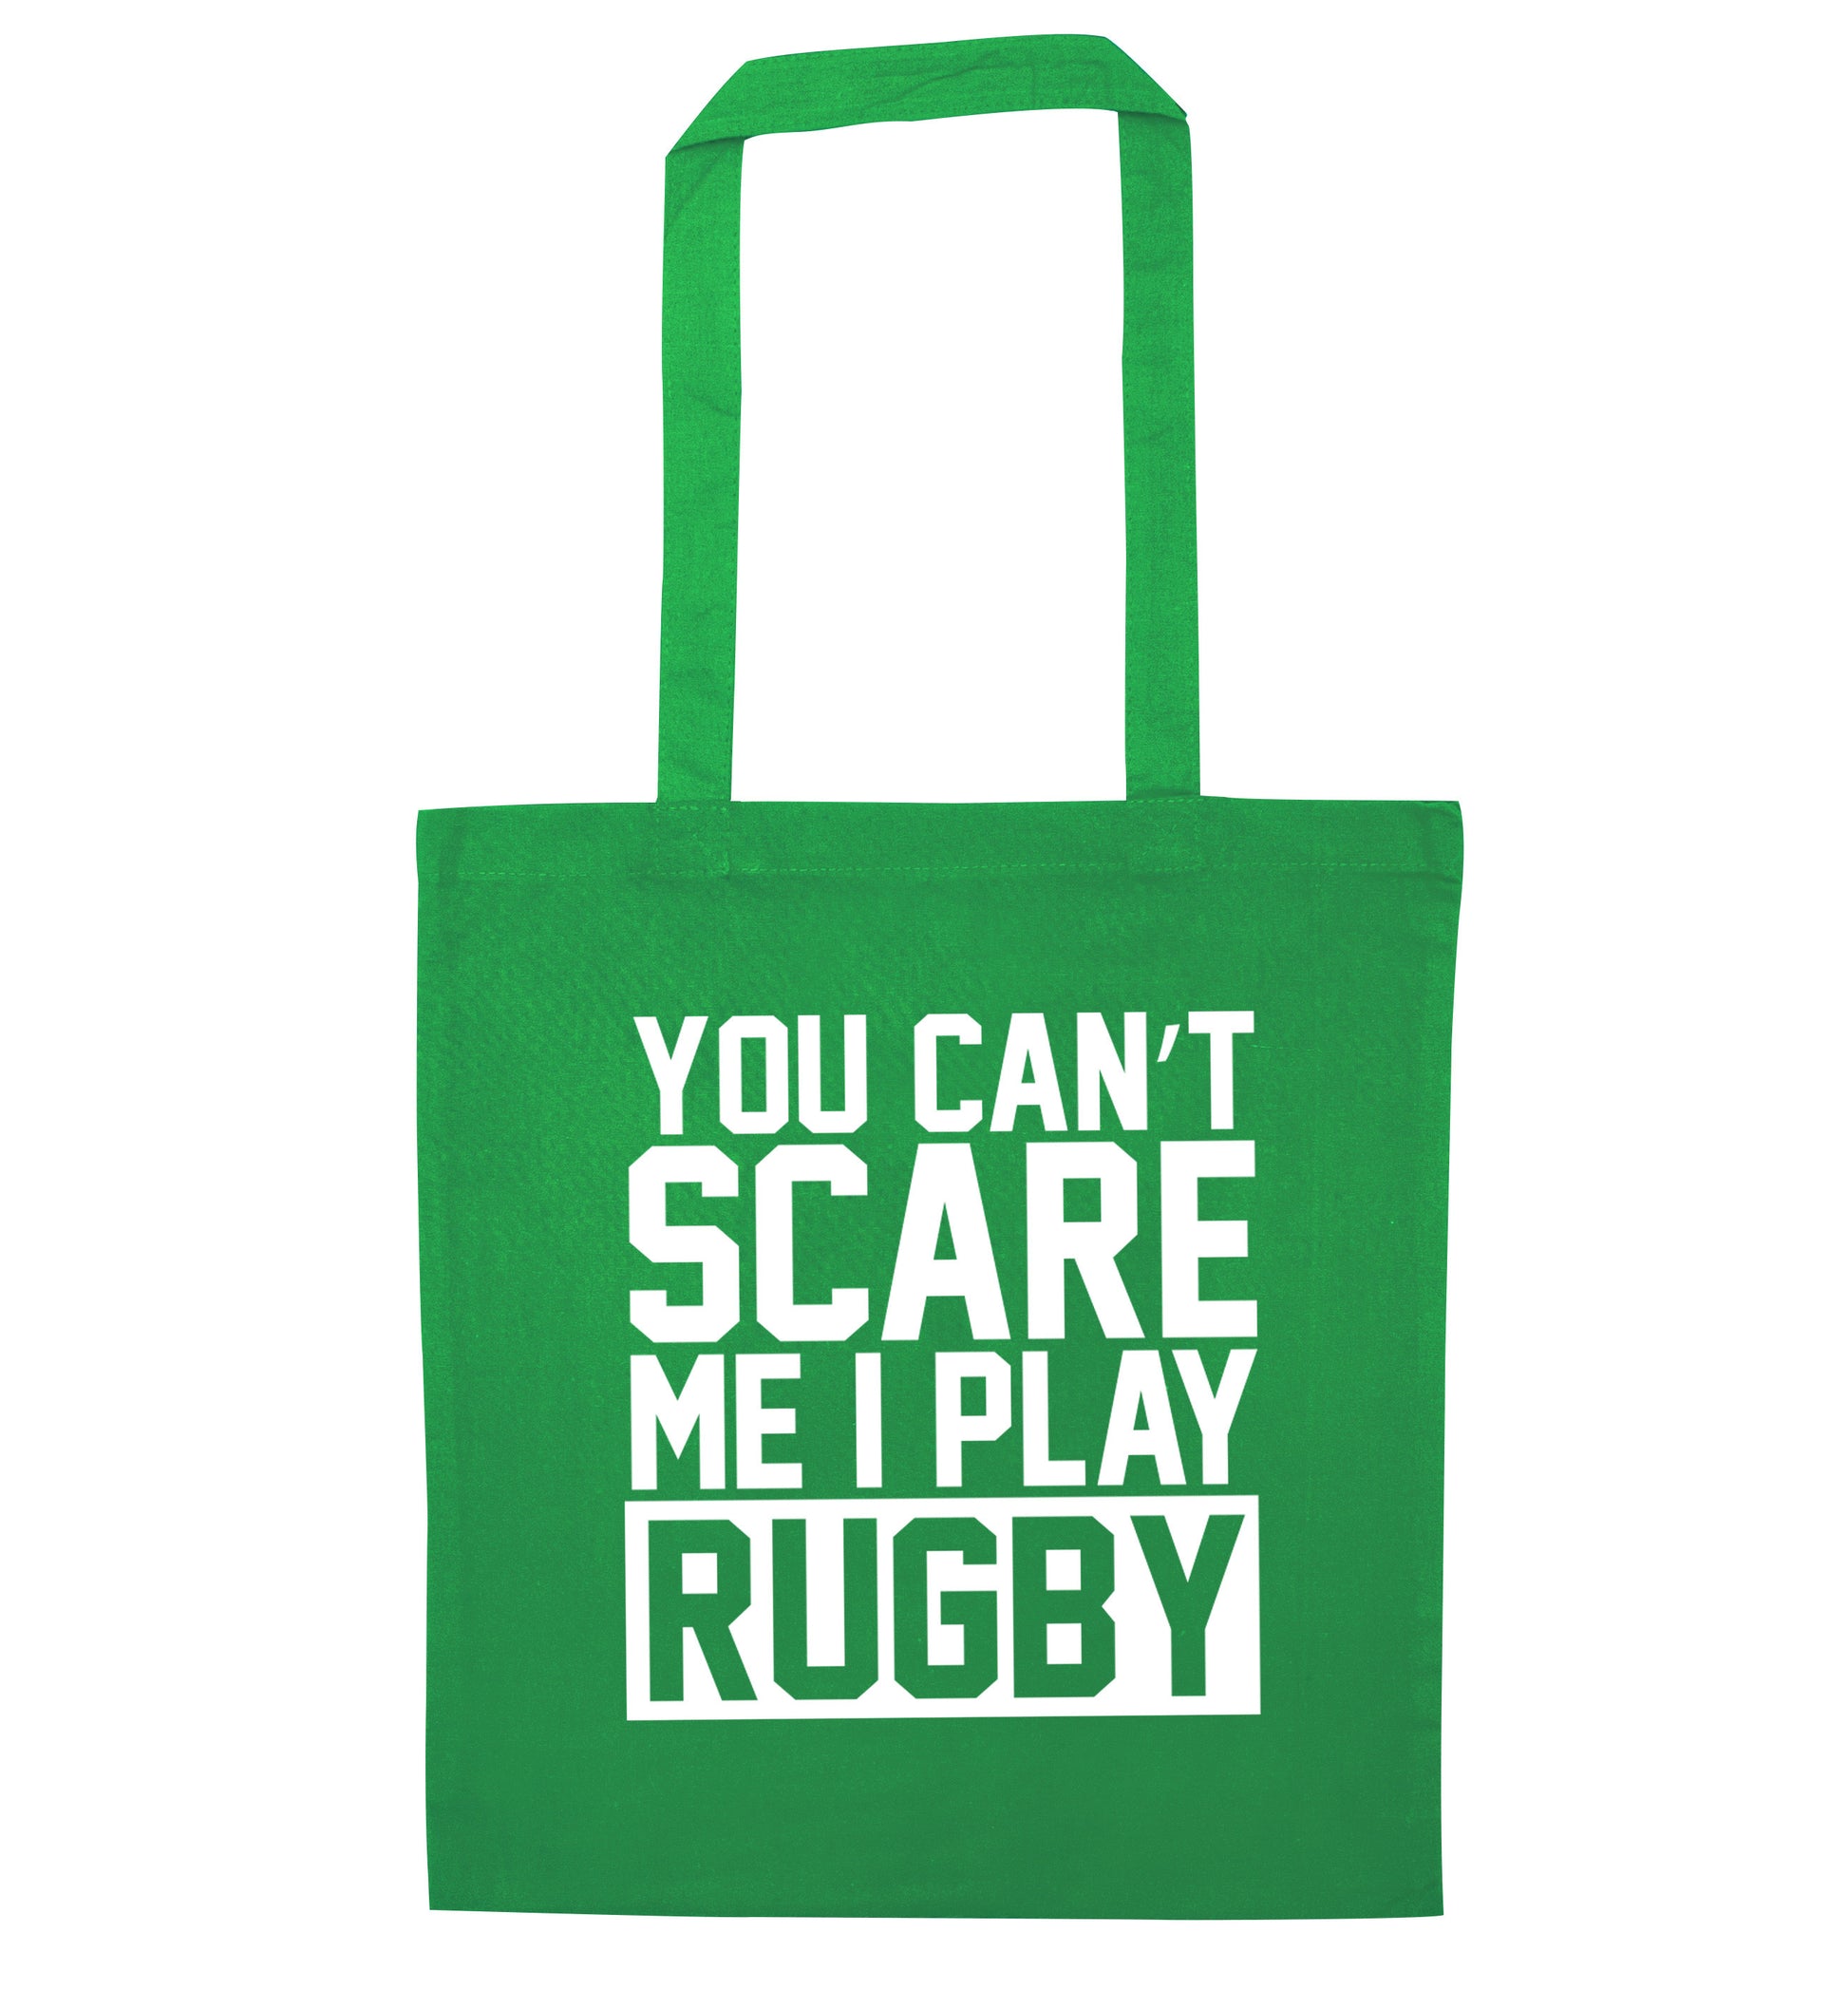 You can't scare me I play rugby green tote bag